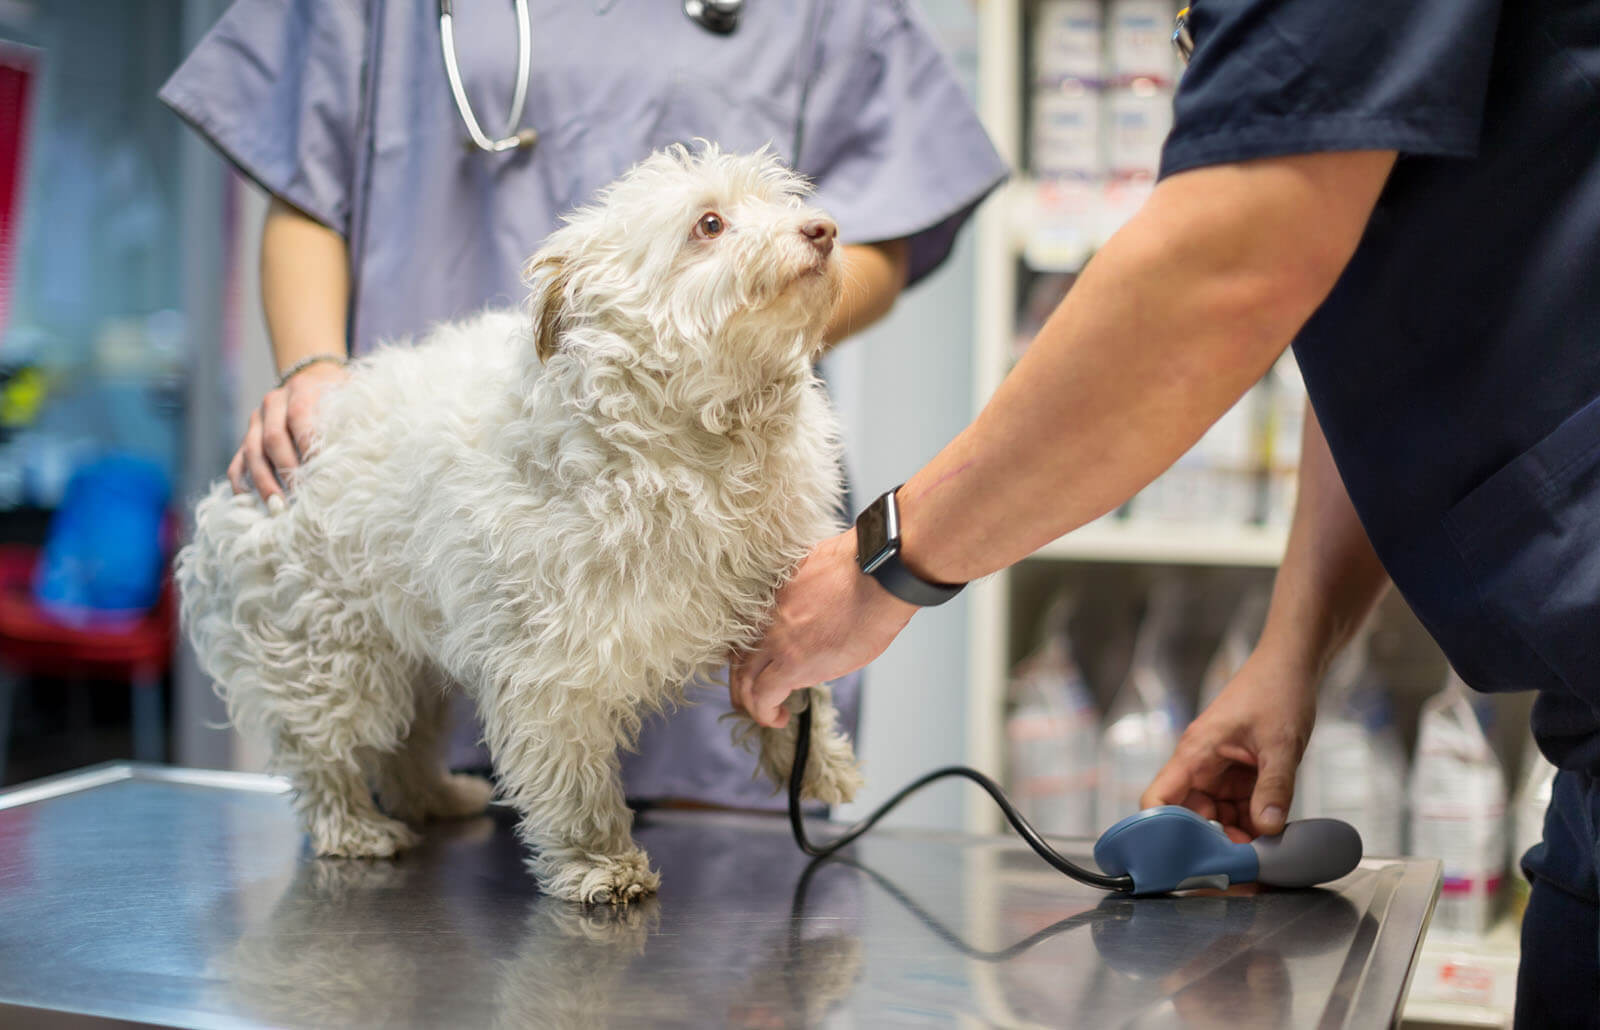 How do you measure a dog's blood pressure?